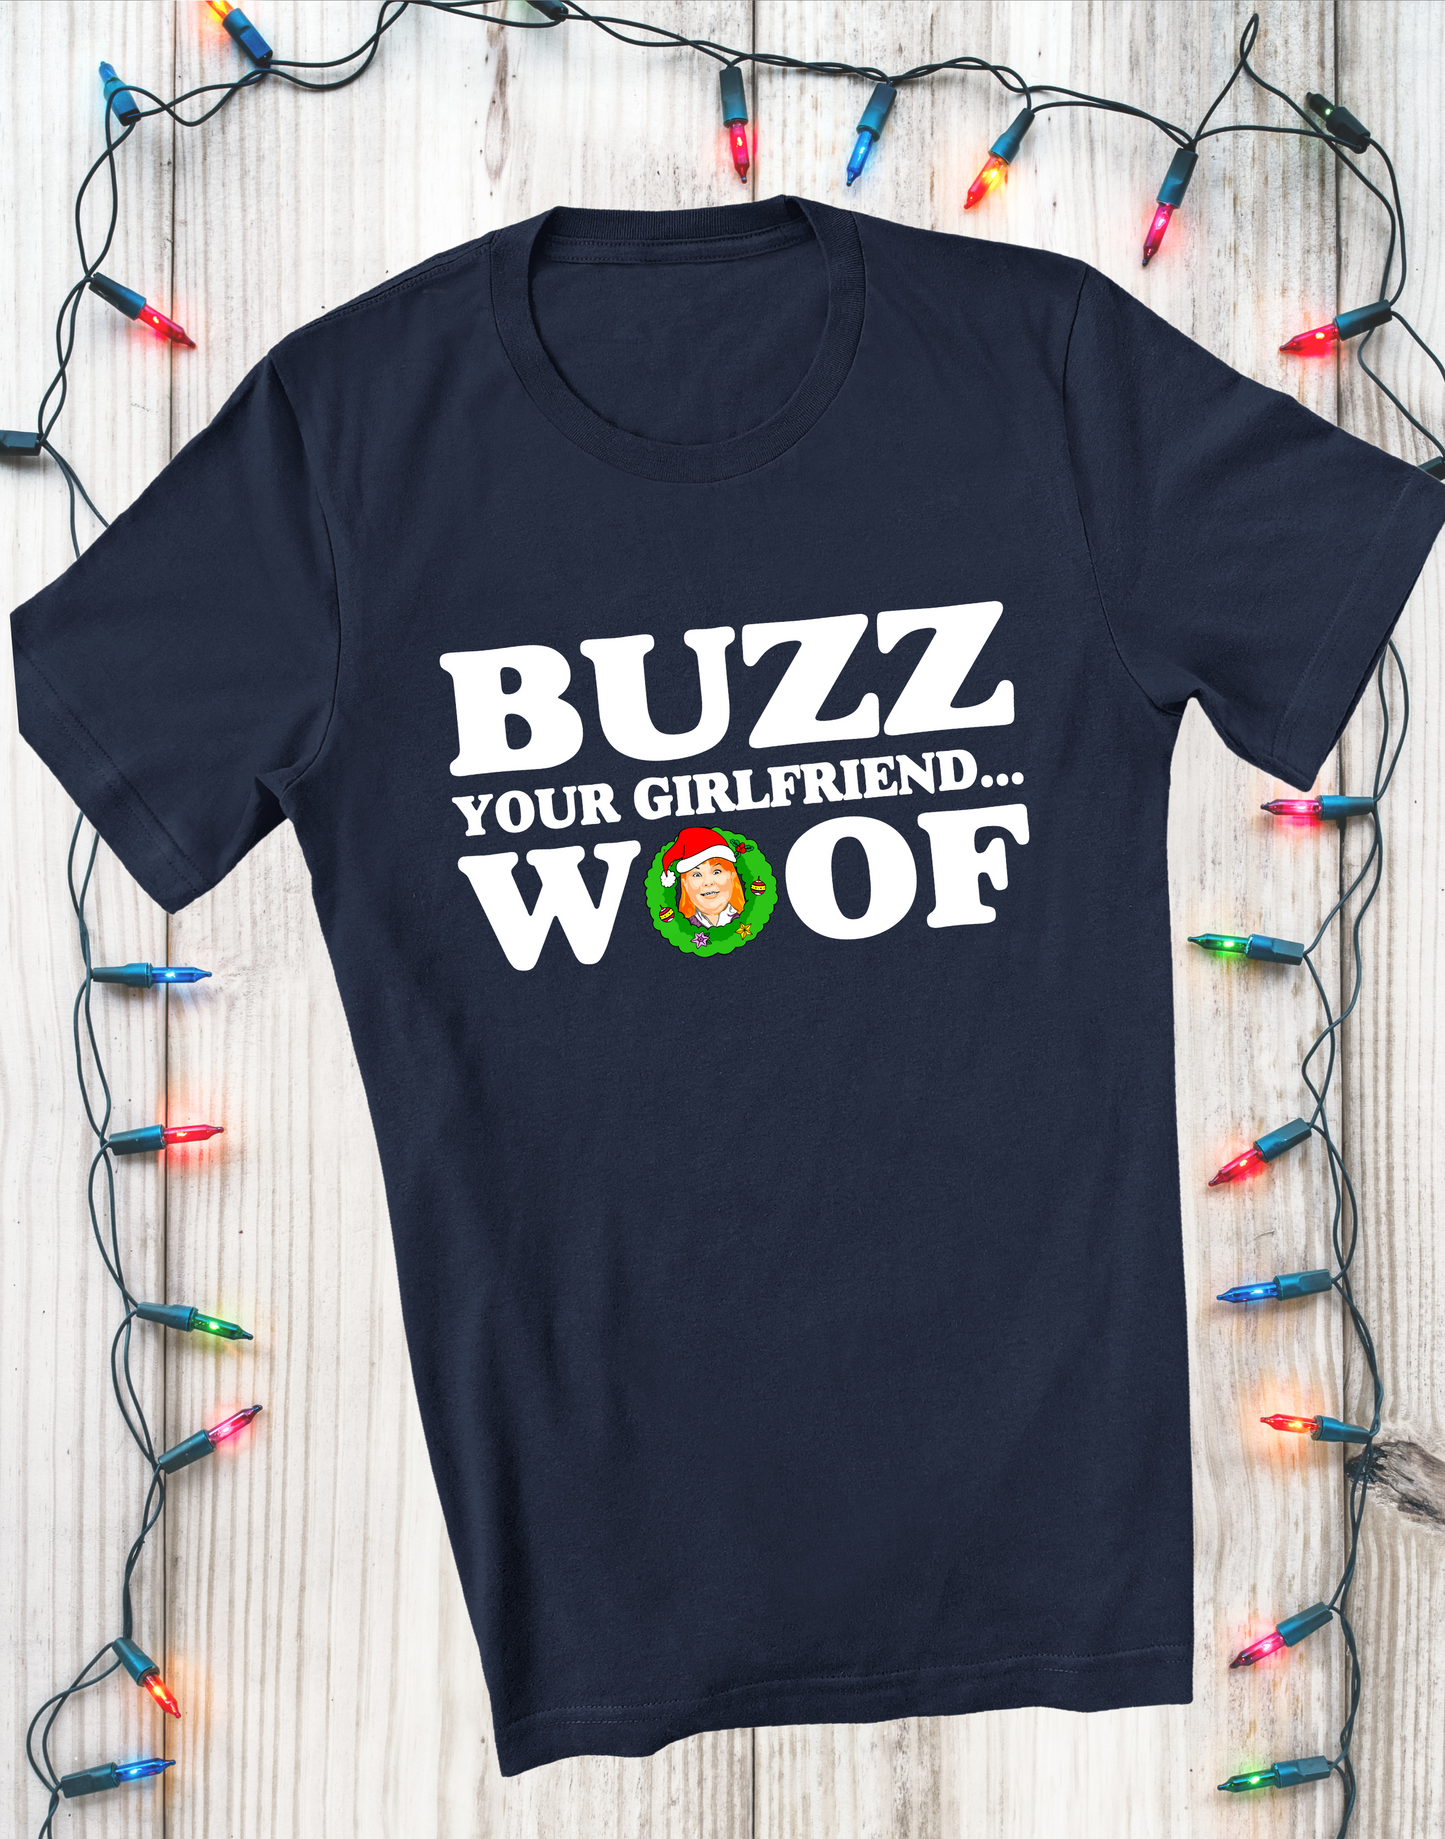 WOOF!- Home for the holidays